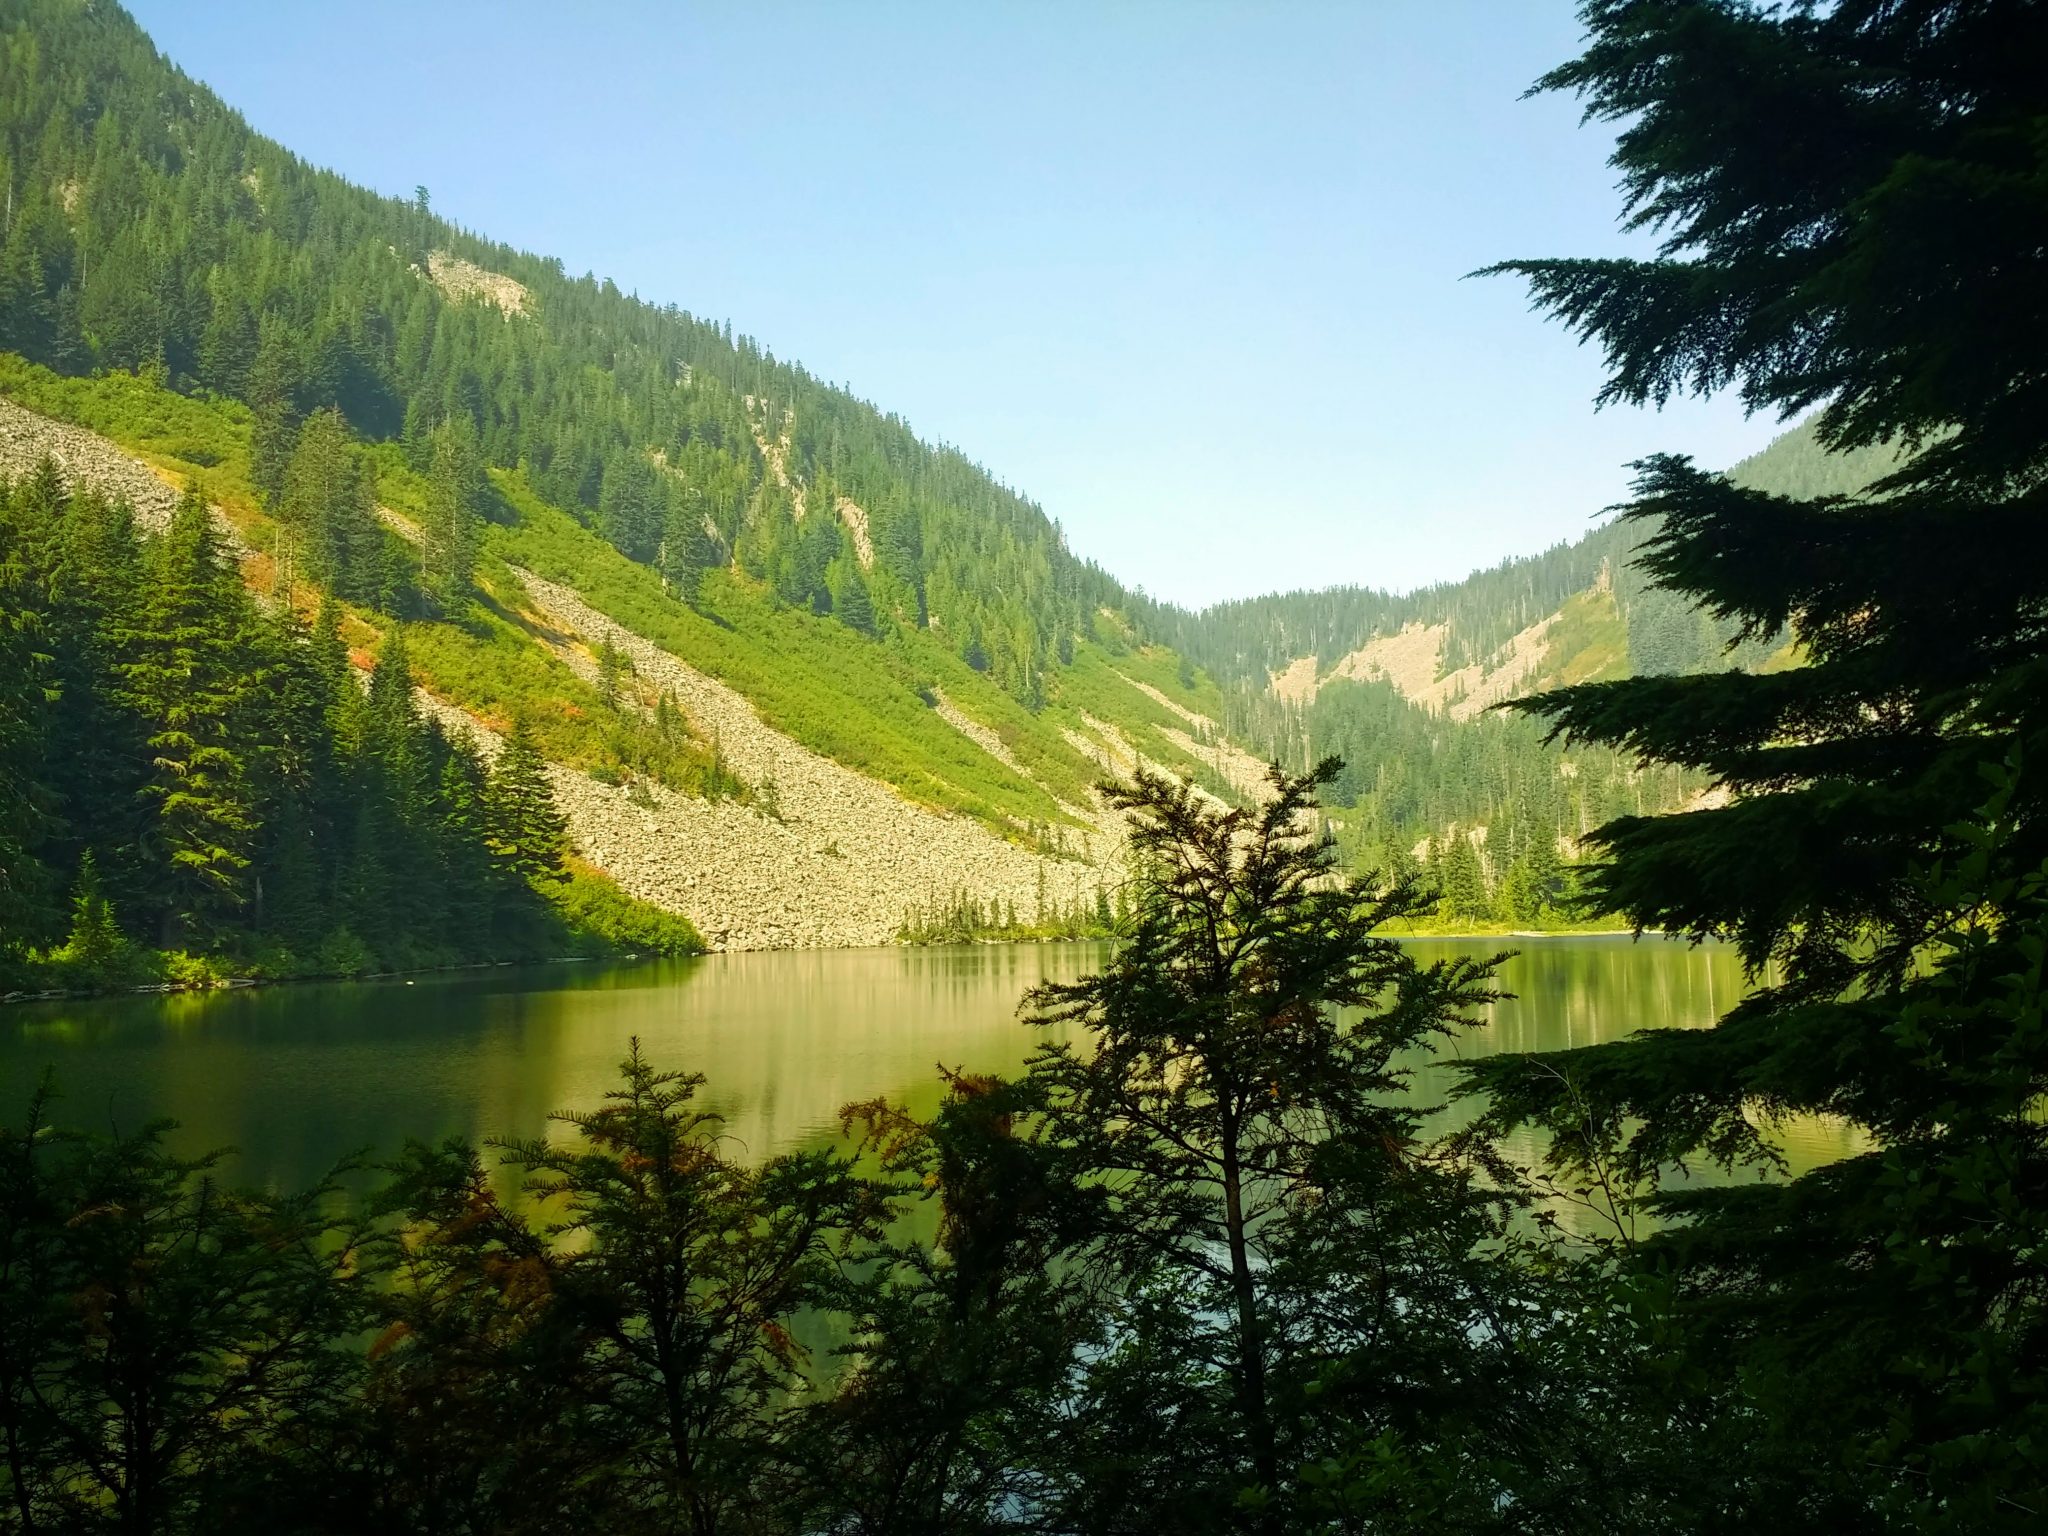 Talapus lake hike near Snoqualmie pass. It's a large alpine lake surrounded by forest and rocky mountains, which are reflected in the lake. There are evergreen trees in the foreground and it's a sunny day